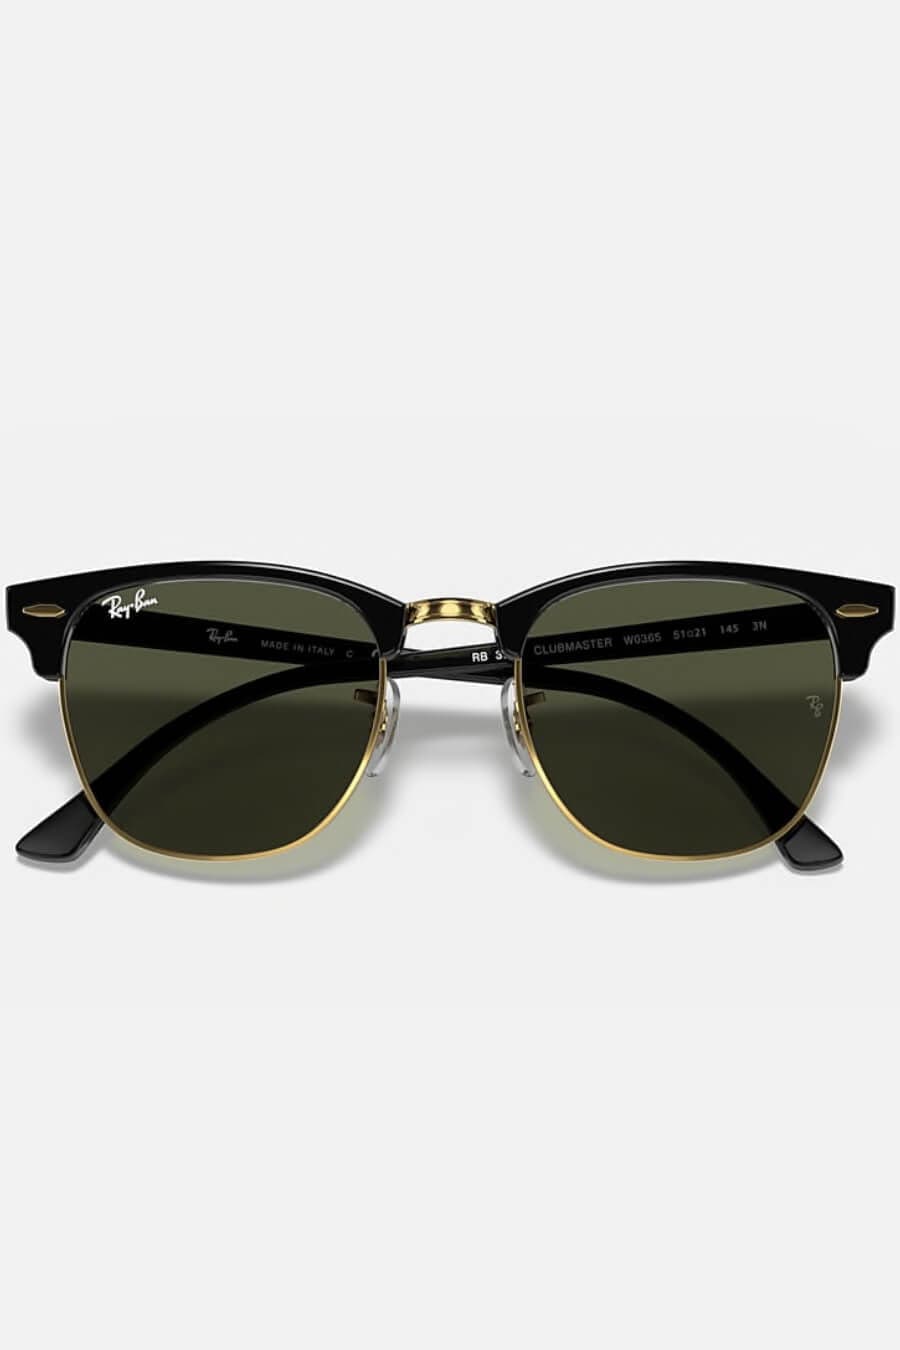 Ray-Ban RB3016 W0365 51 Clubmaster